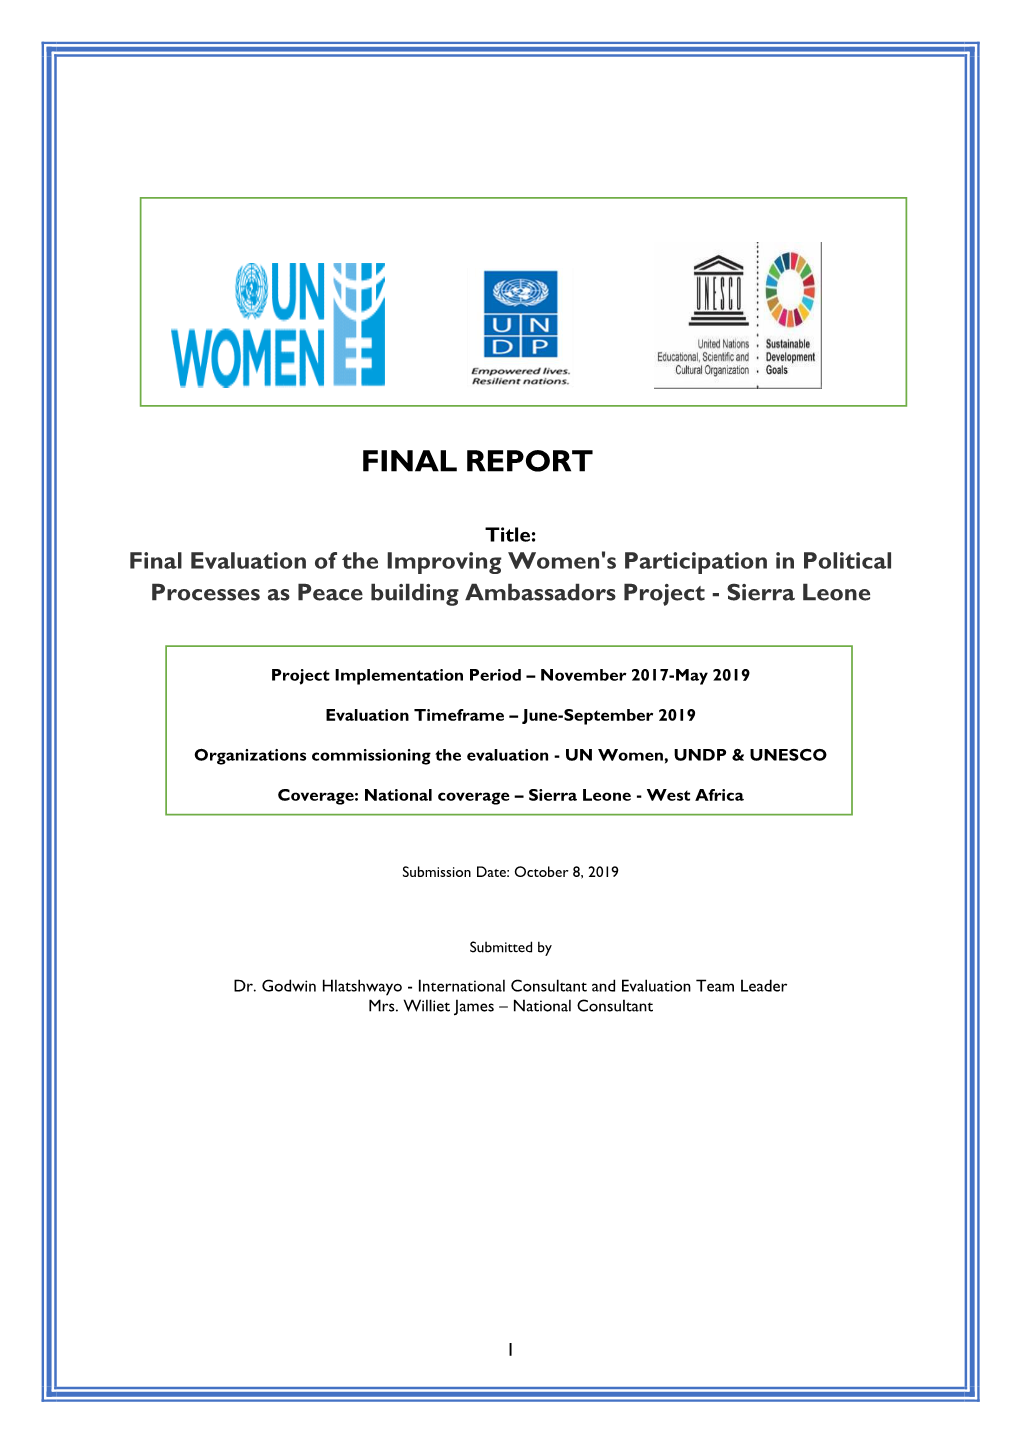 Final Evaluation of the Improving Women's Participation in Political